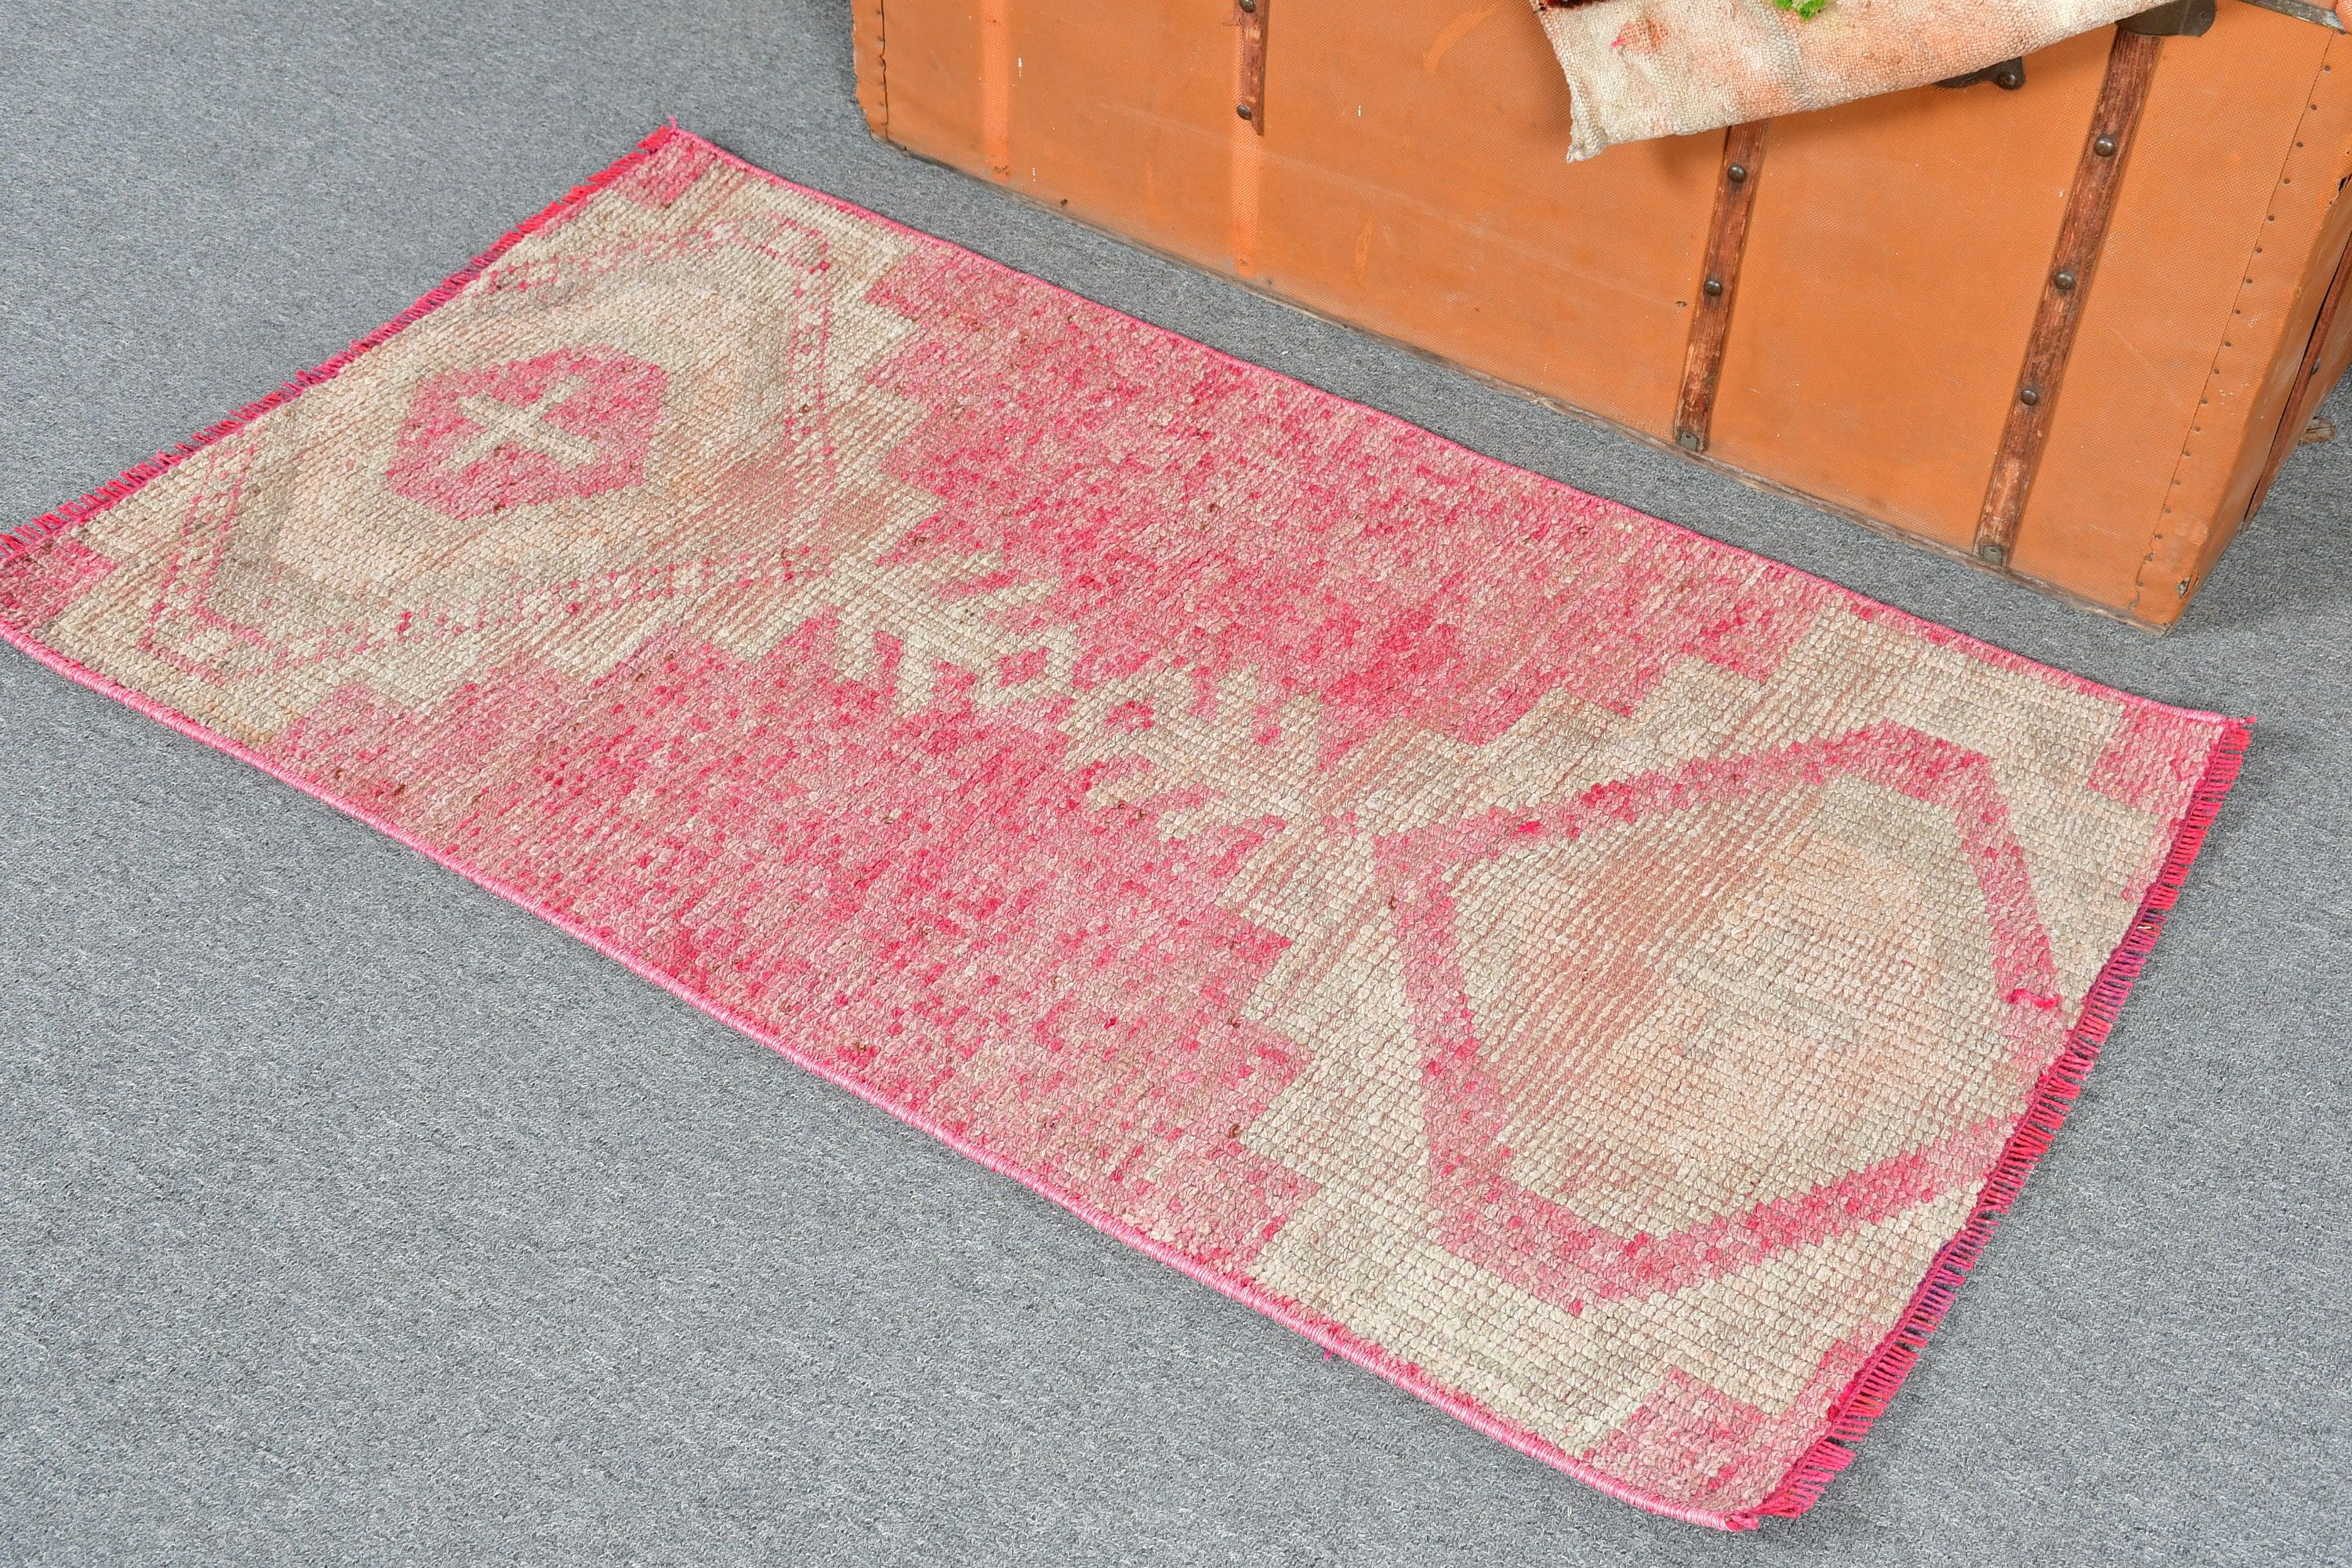 Pink Cool Rug, Oushak Rugs, Door Mat Rug, Decorative Rug, Antique Rug, Turkish Rugs, Wall Hanging Rugs, 2.2x3.8 ft Small Rugs, Vintage Rugs